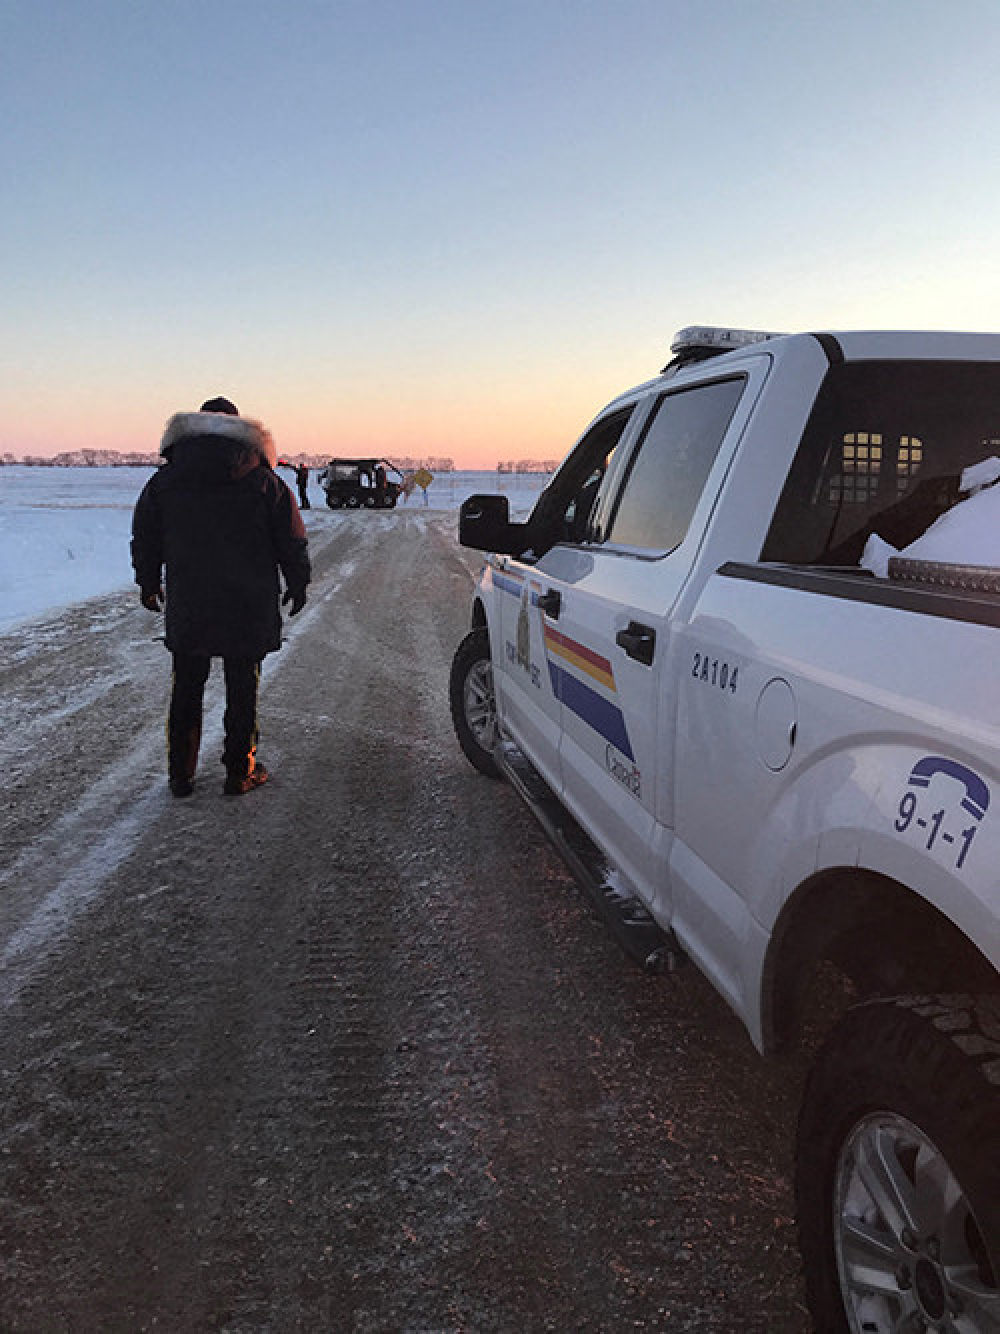 Canadian officers in Emerson where four people were found dead near the Canada-US border. Photo: RCMP/AFP